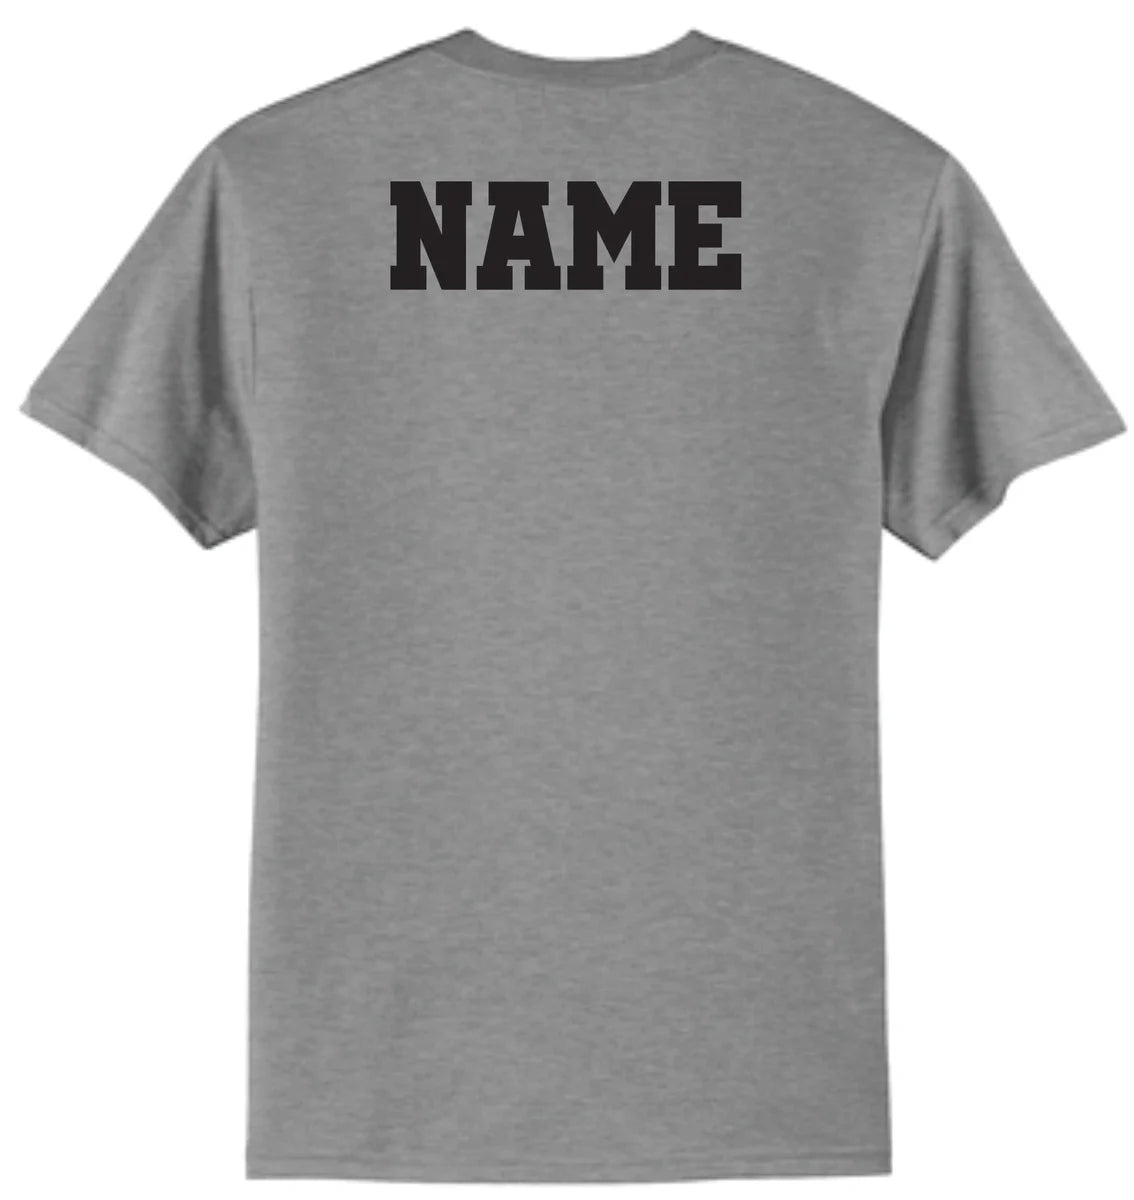 Add Name to garment -